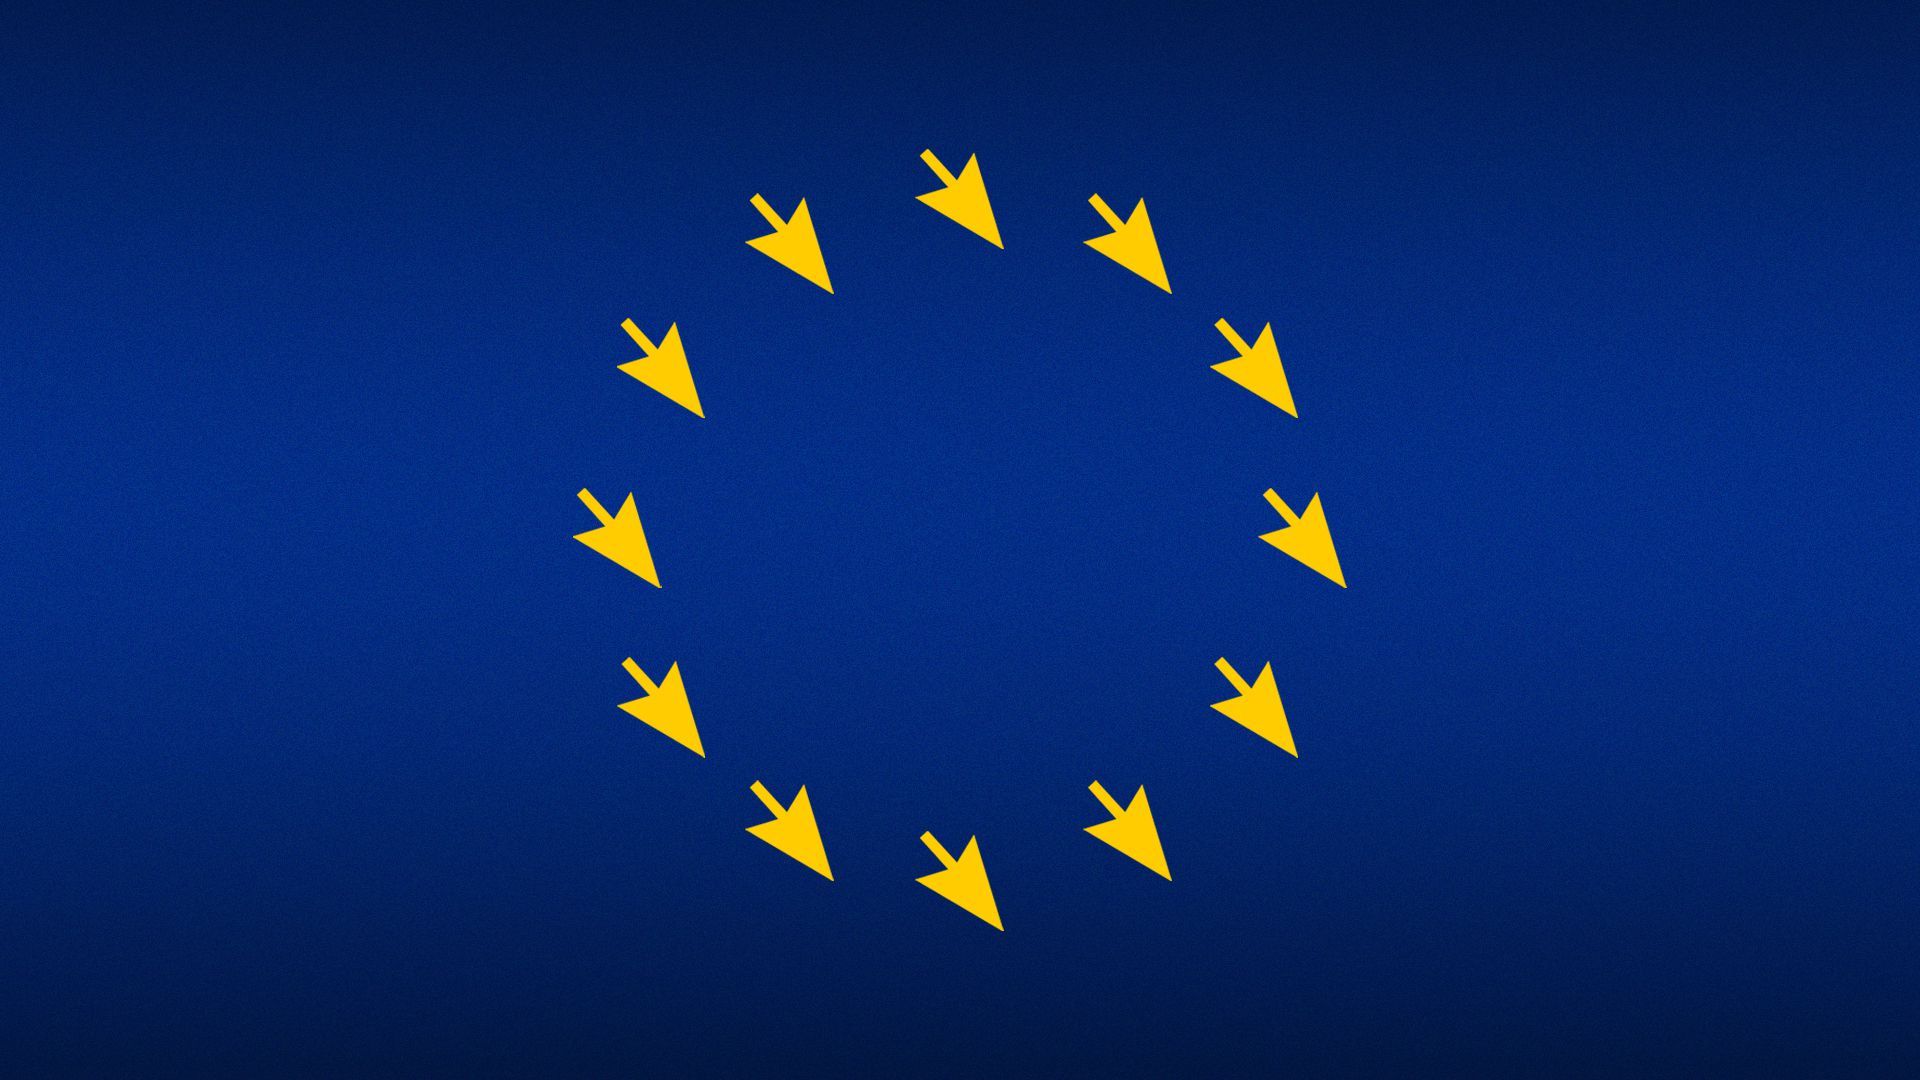 Illustration of the EU flag with downward facing cursor arrows in place of stars.